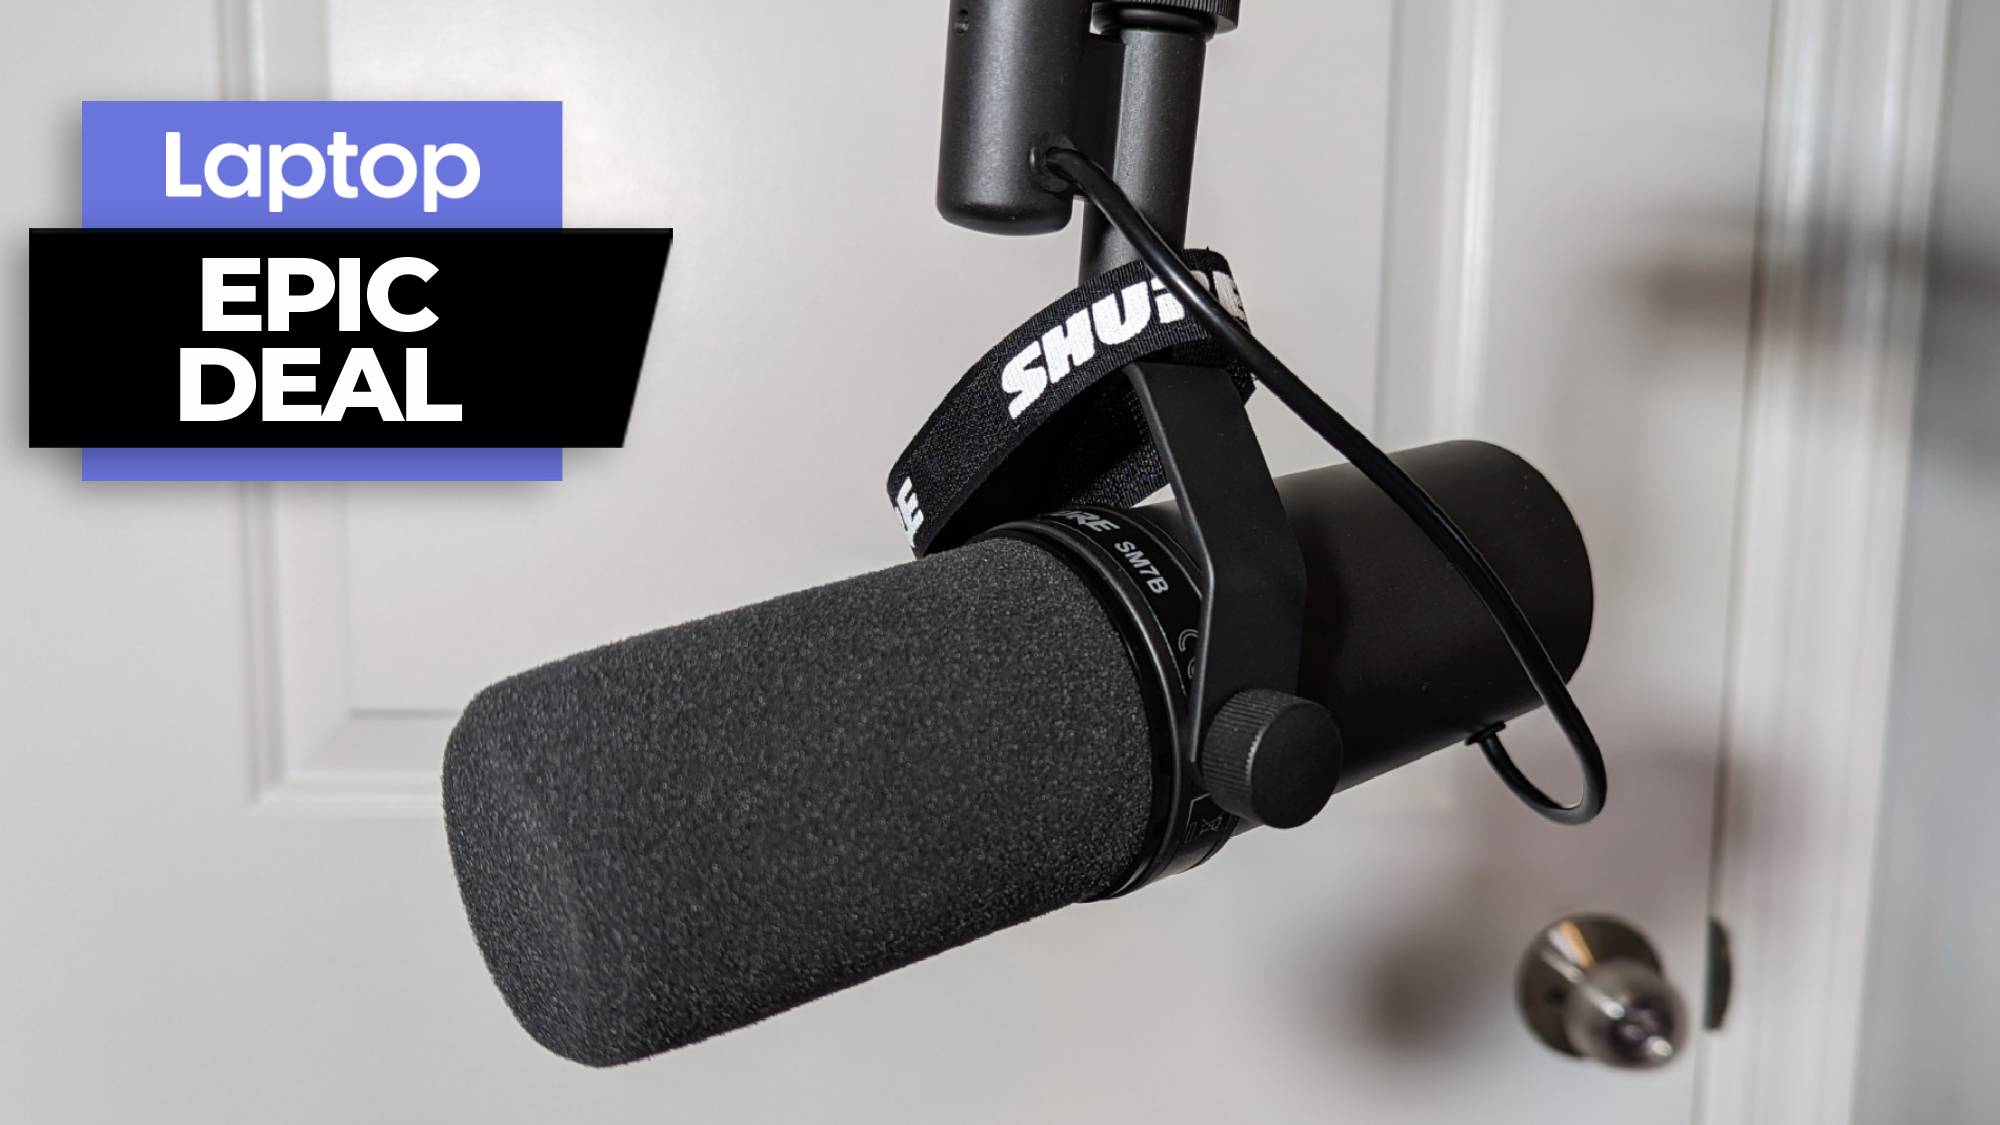 The excellent Shure SM7B XLR microphone drops to $359 — lowest